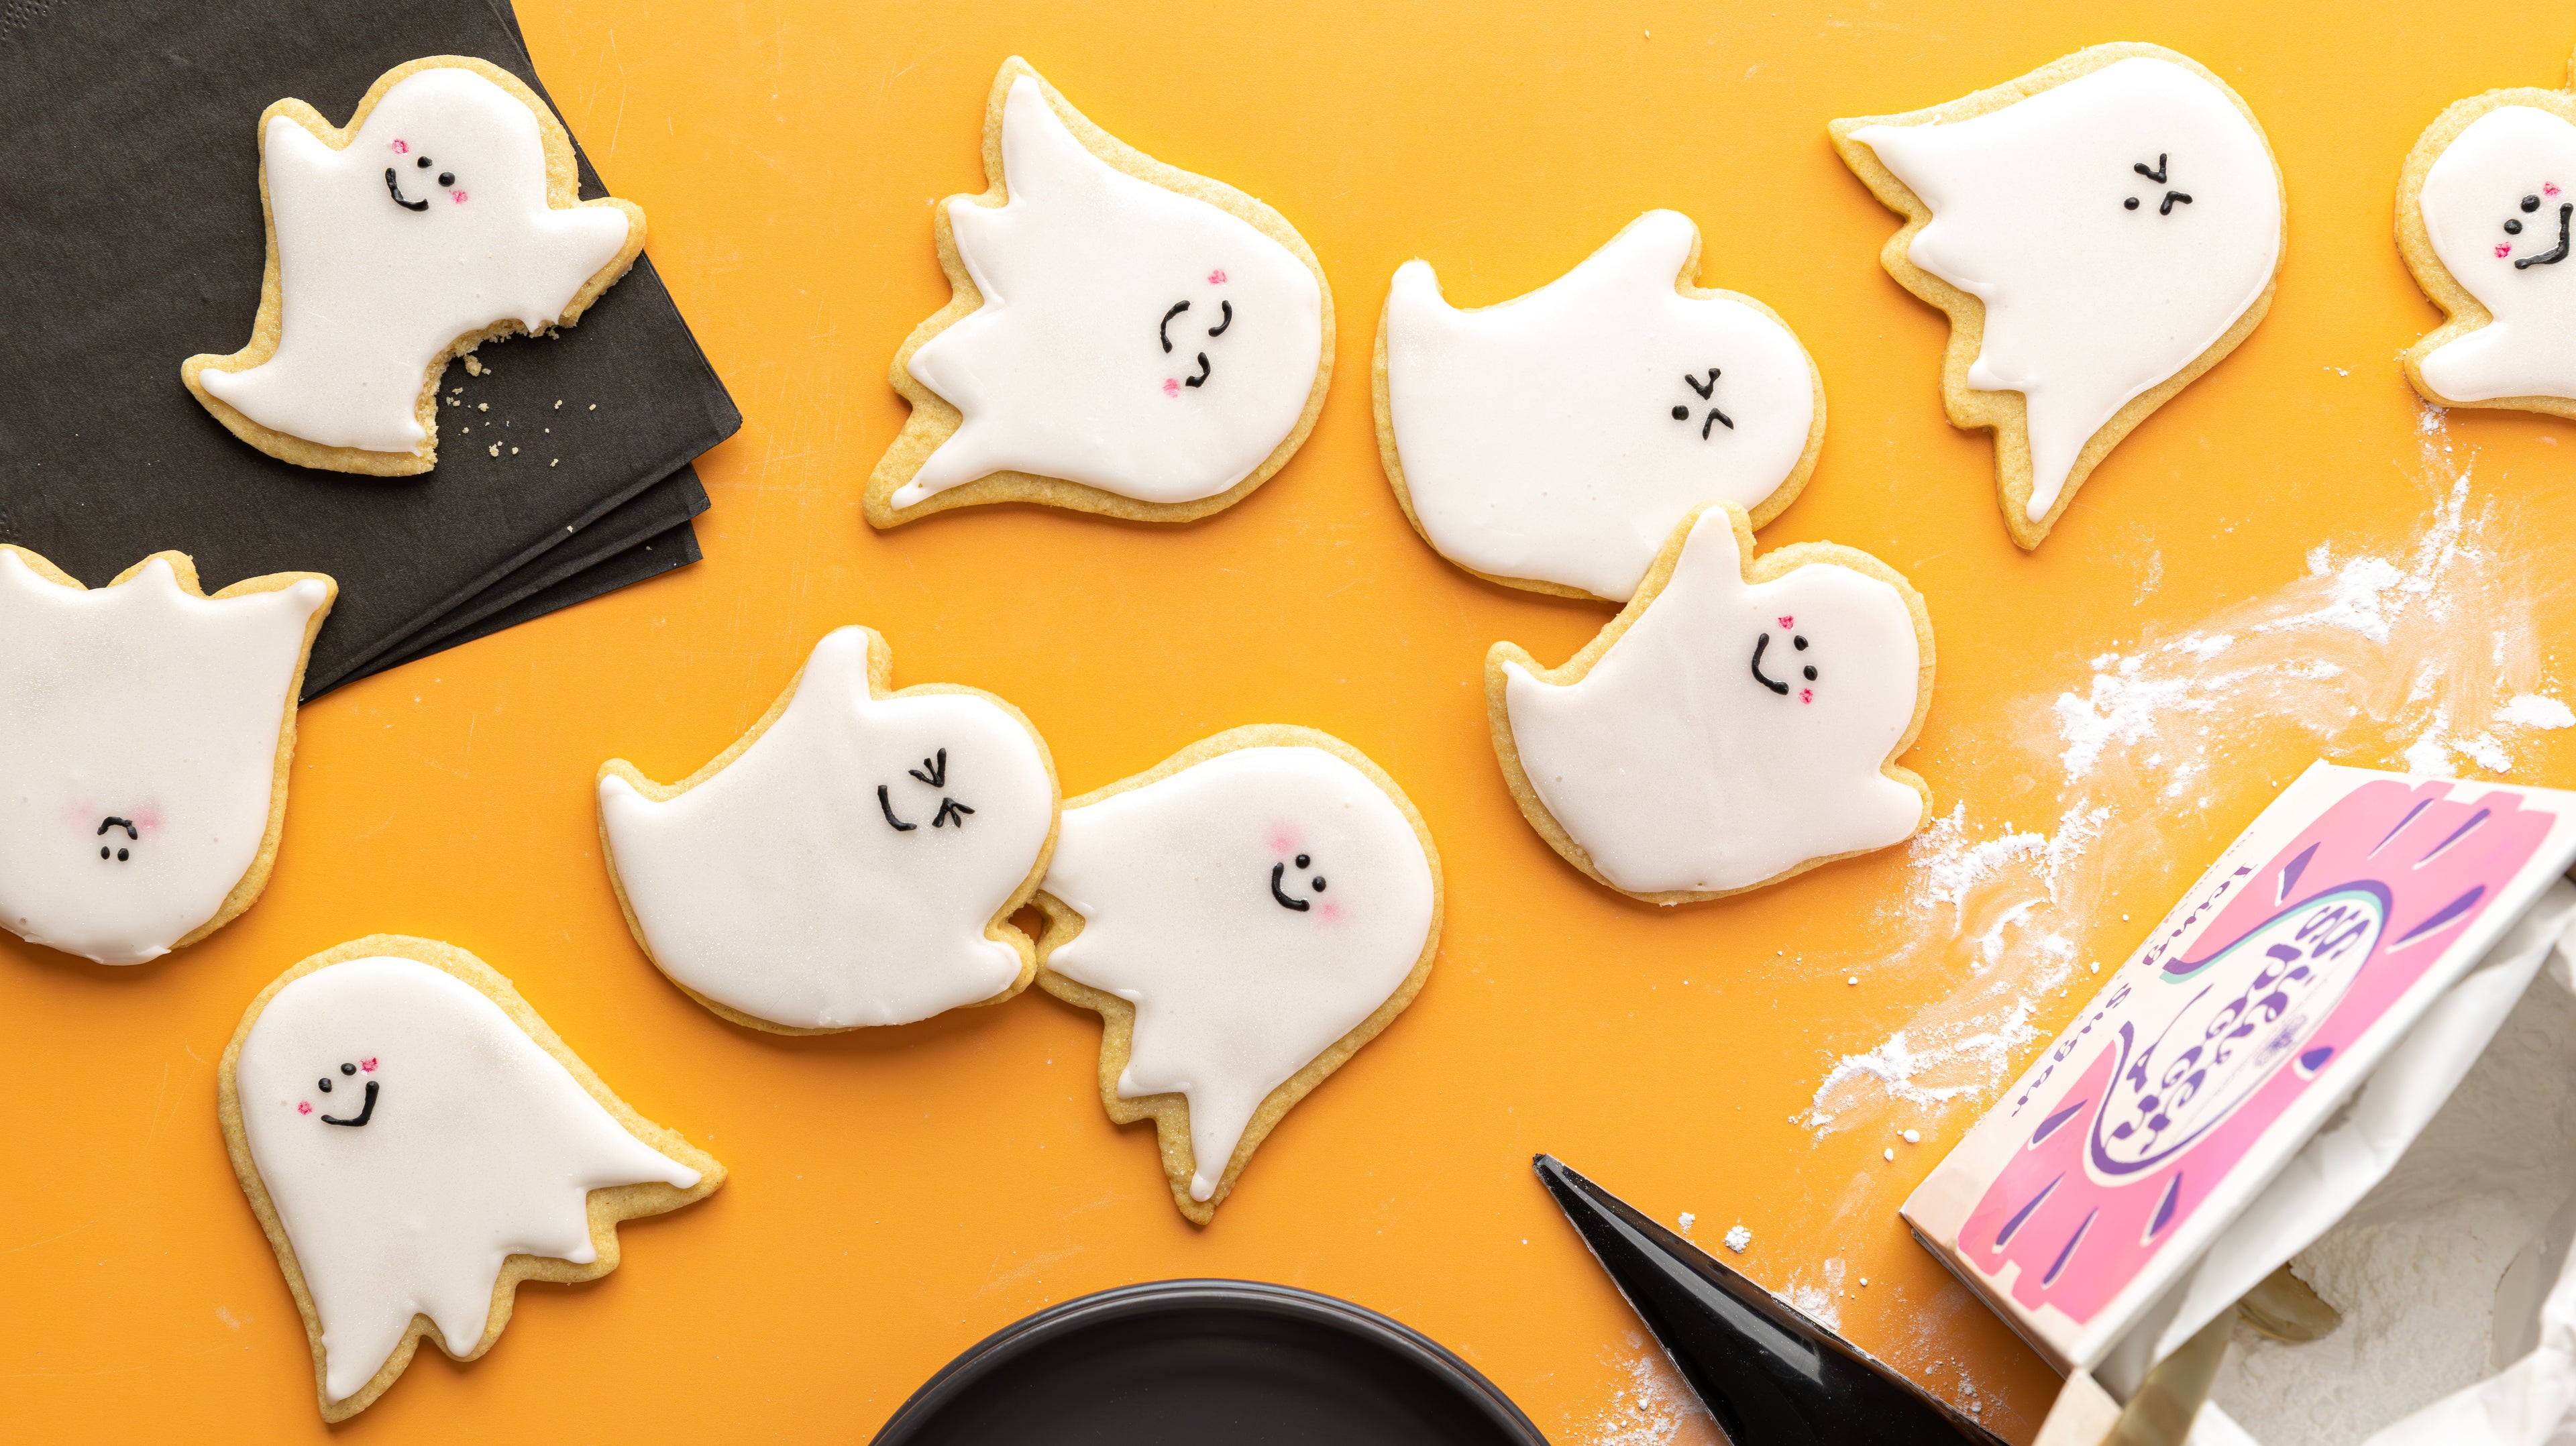 Ghost themed biscuits on an orange background with icing sugar pack